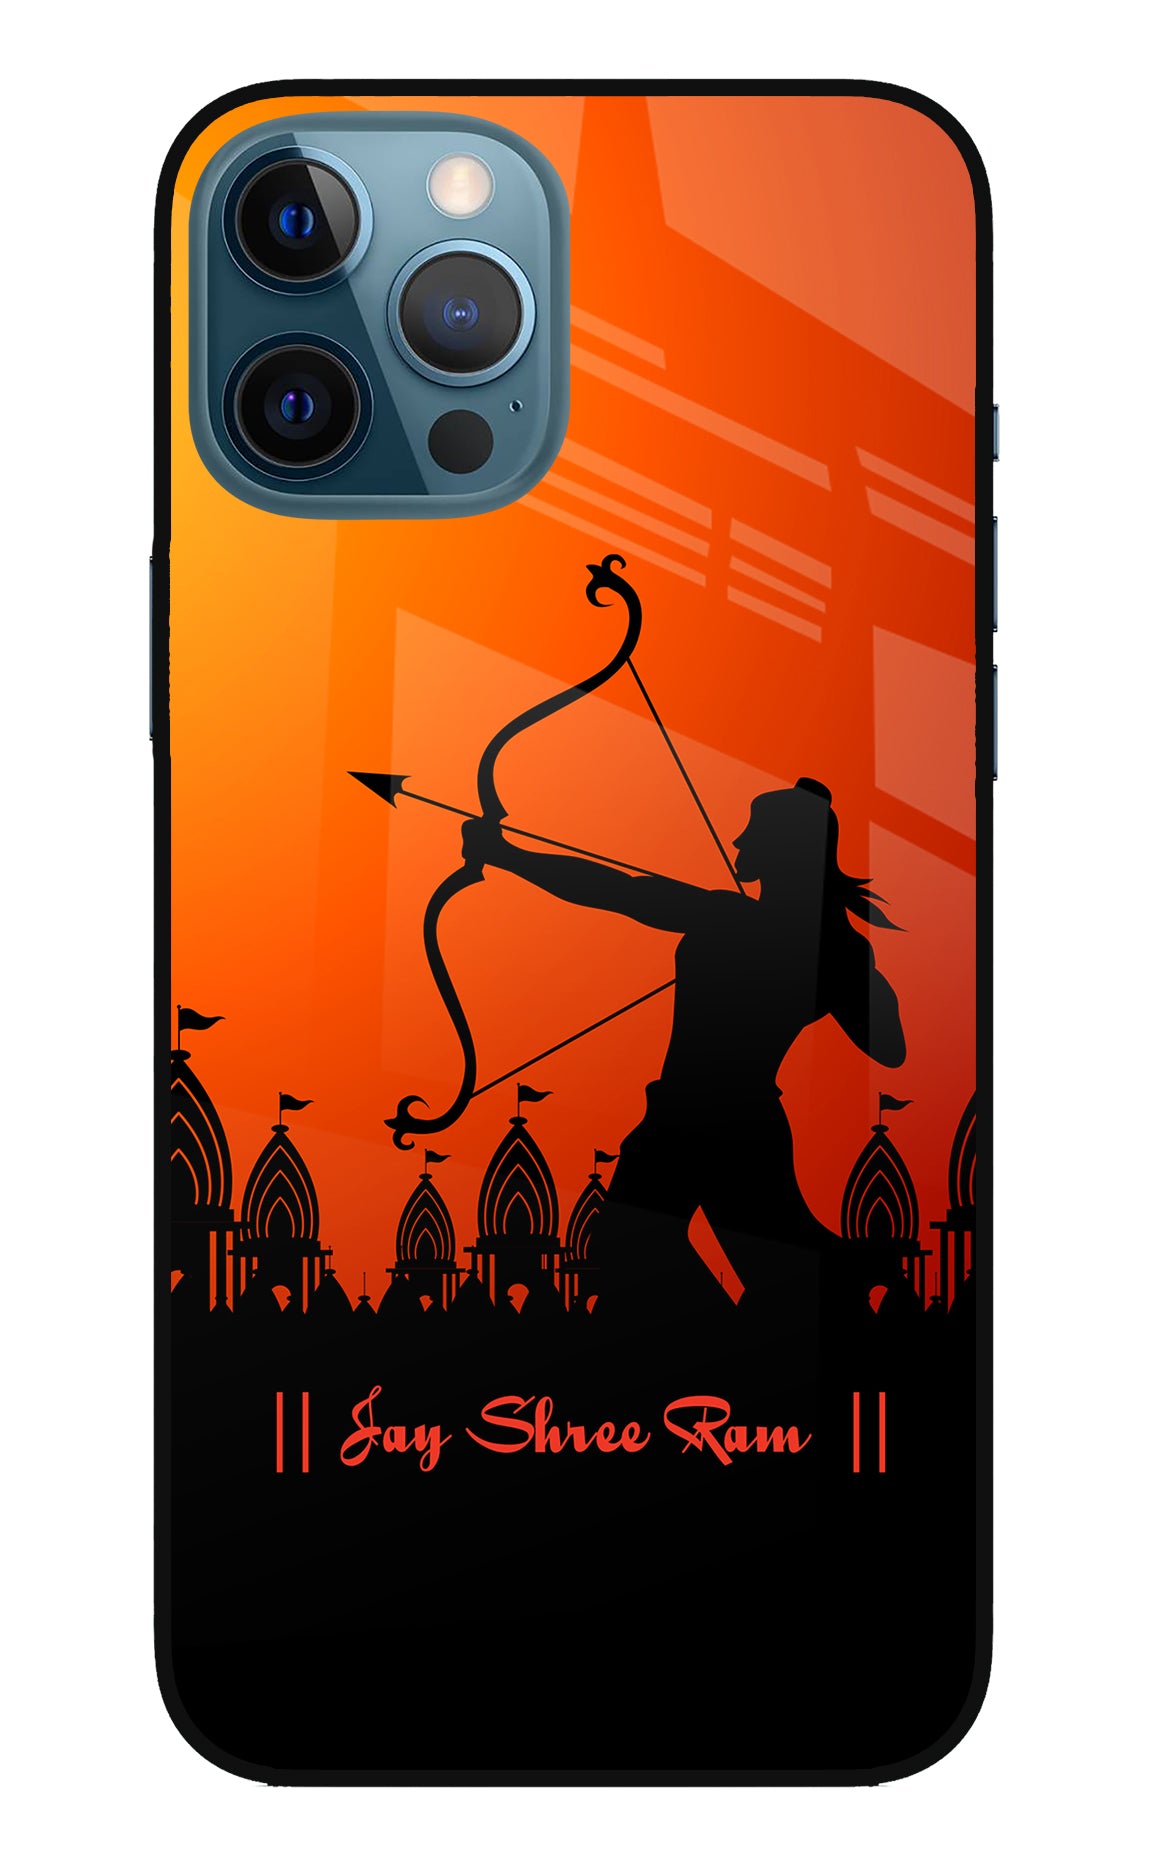 Lord Ram - 4 iPhone 12 Pro Max Back Cover